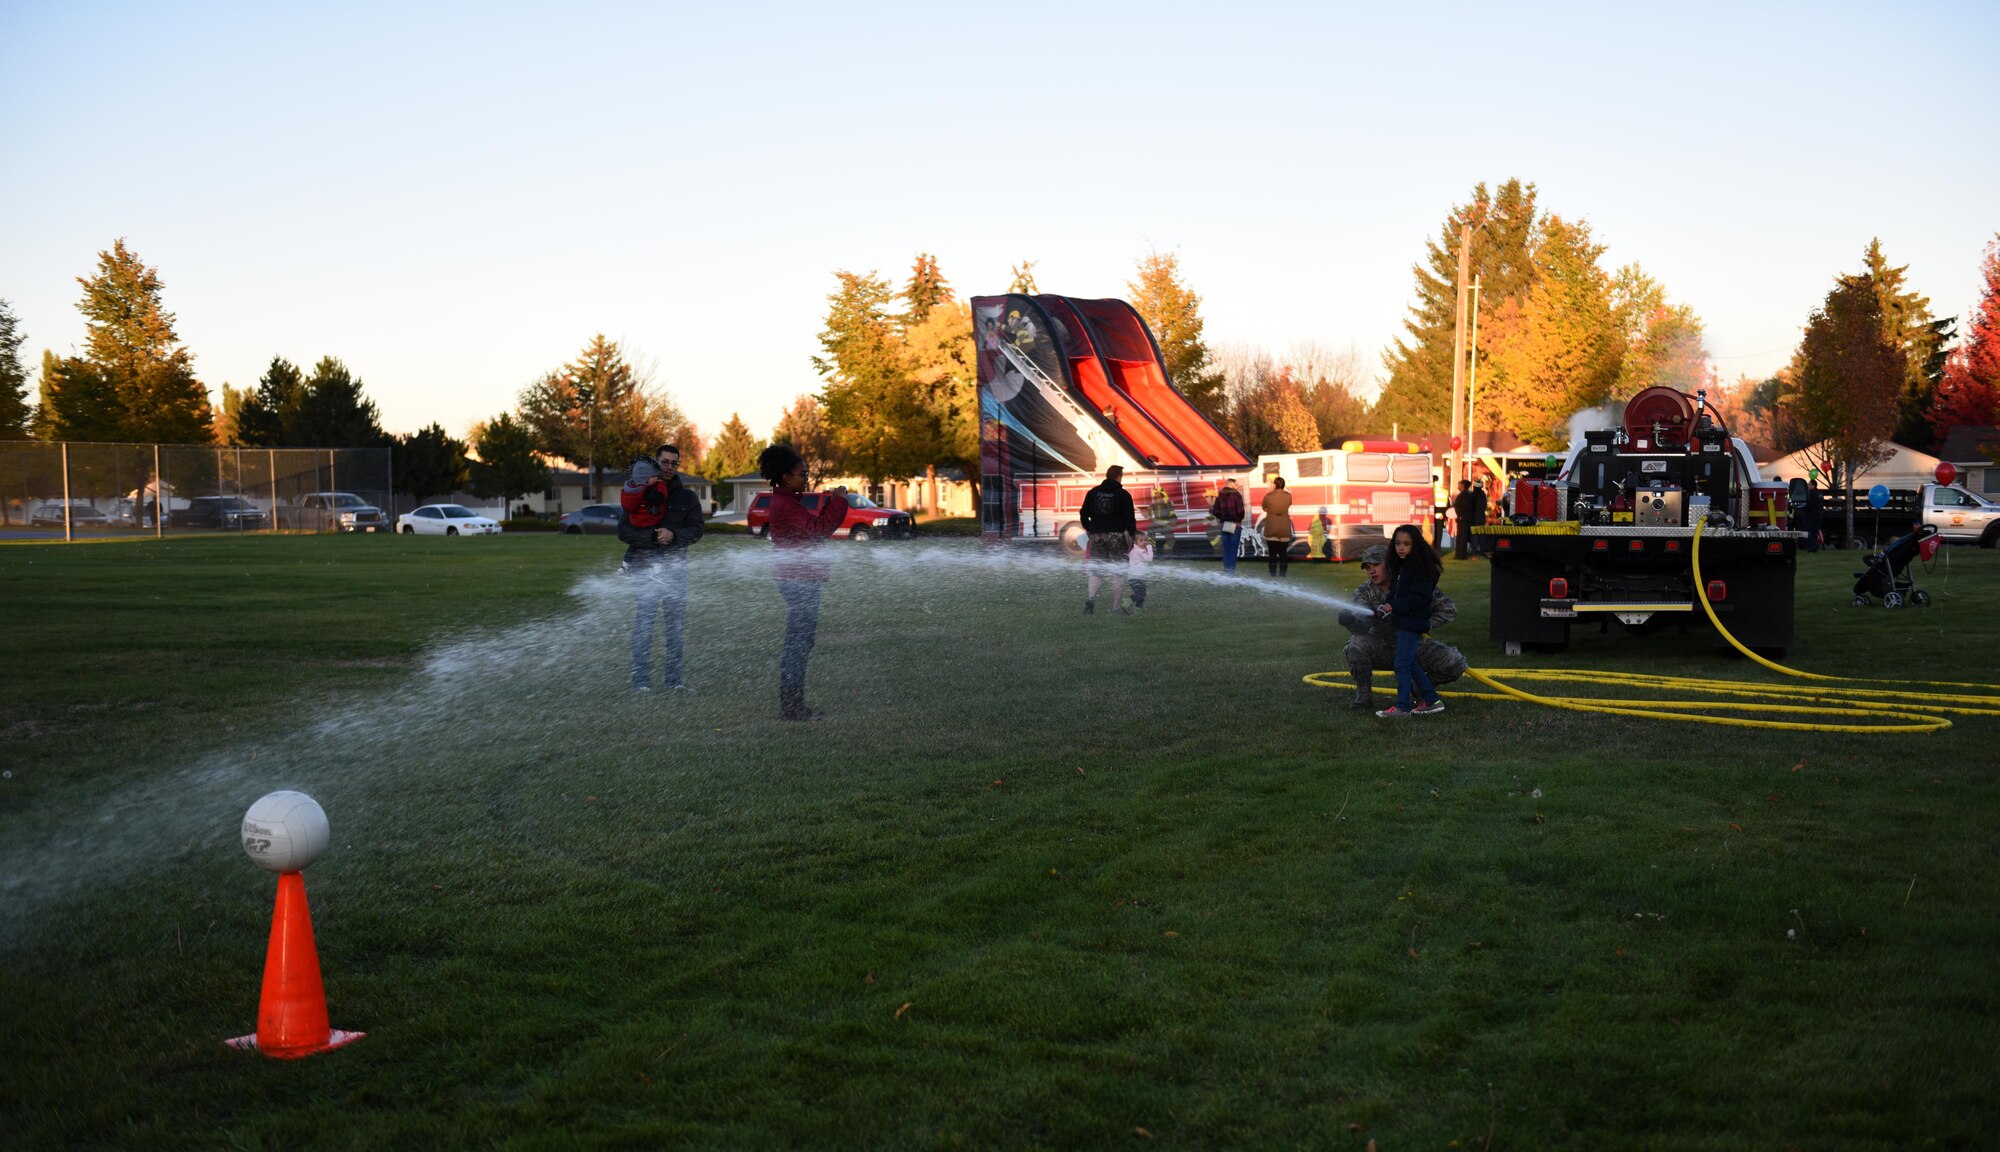 Members of Team Fairchild practice aiming a fire hose during the Fire Prevention Week Carnival Oct. 12, 2016, at Fairchild Air Force Base. This year’s slogan was “Don’t wait, check the date,” reminding people that smoke detectors need to be changed every 10 years. The goal of Fire Prevention Week is to spread fire prevention awareness. (U.S. Air Force photo/Airman 1st Class Sean Campbell)